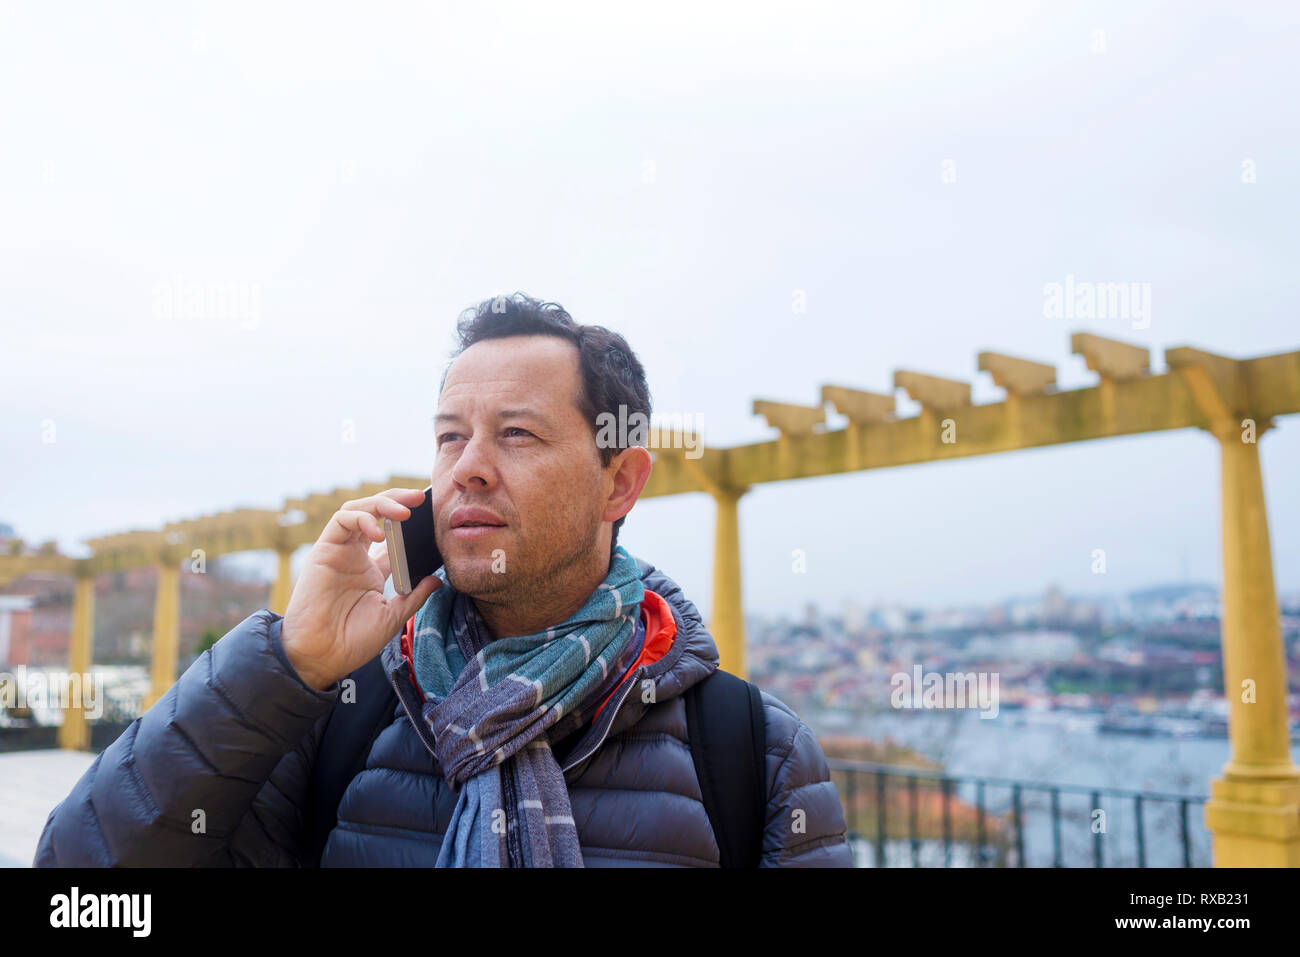 Tourist wearing warm clothing answering smart phone while looking away in city Stock Photo